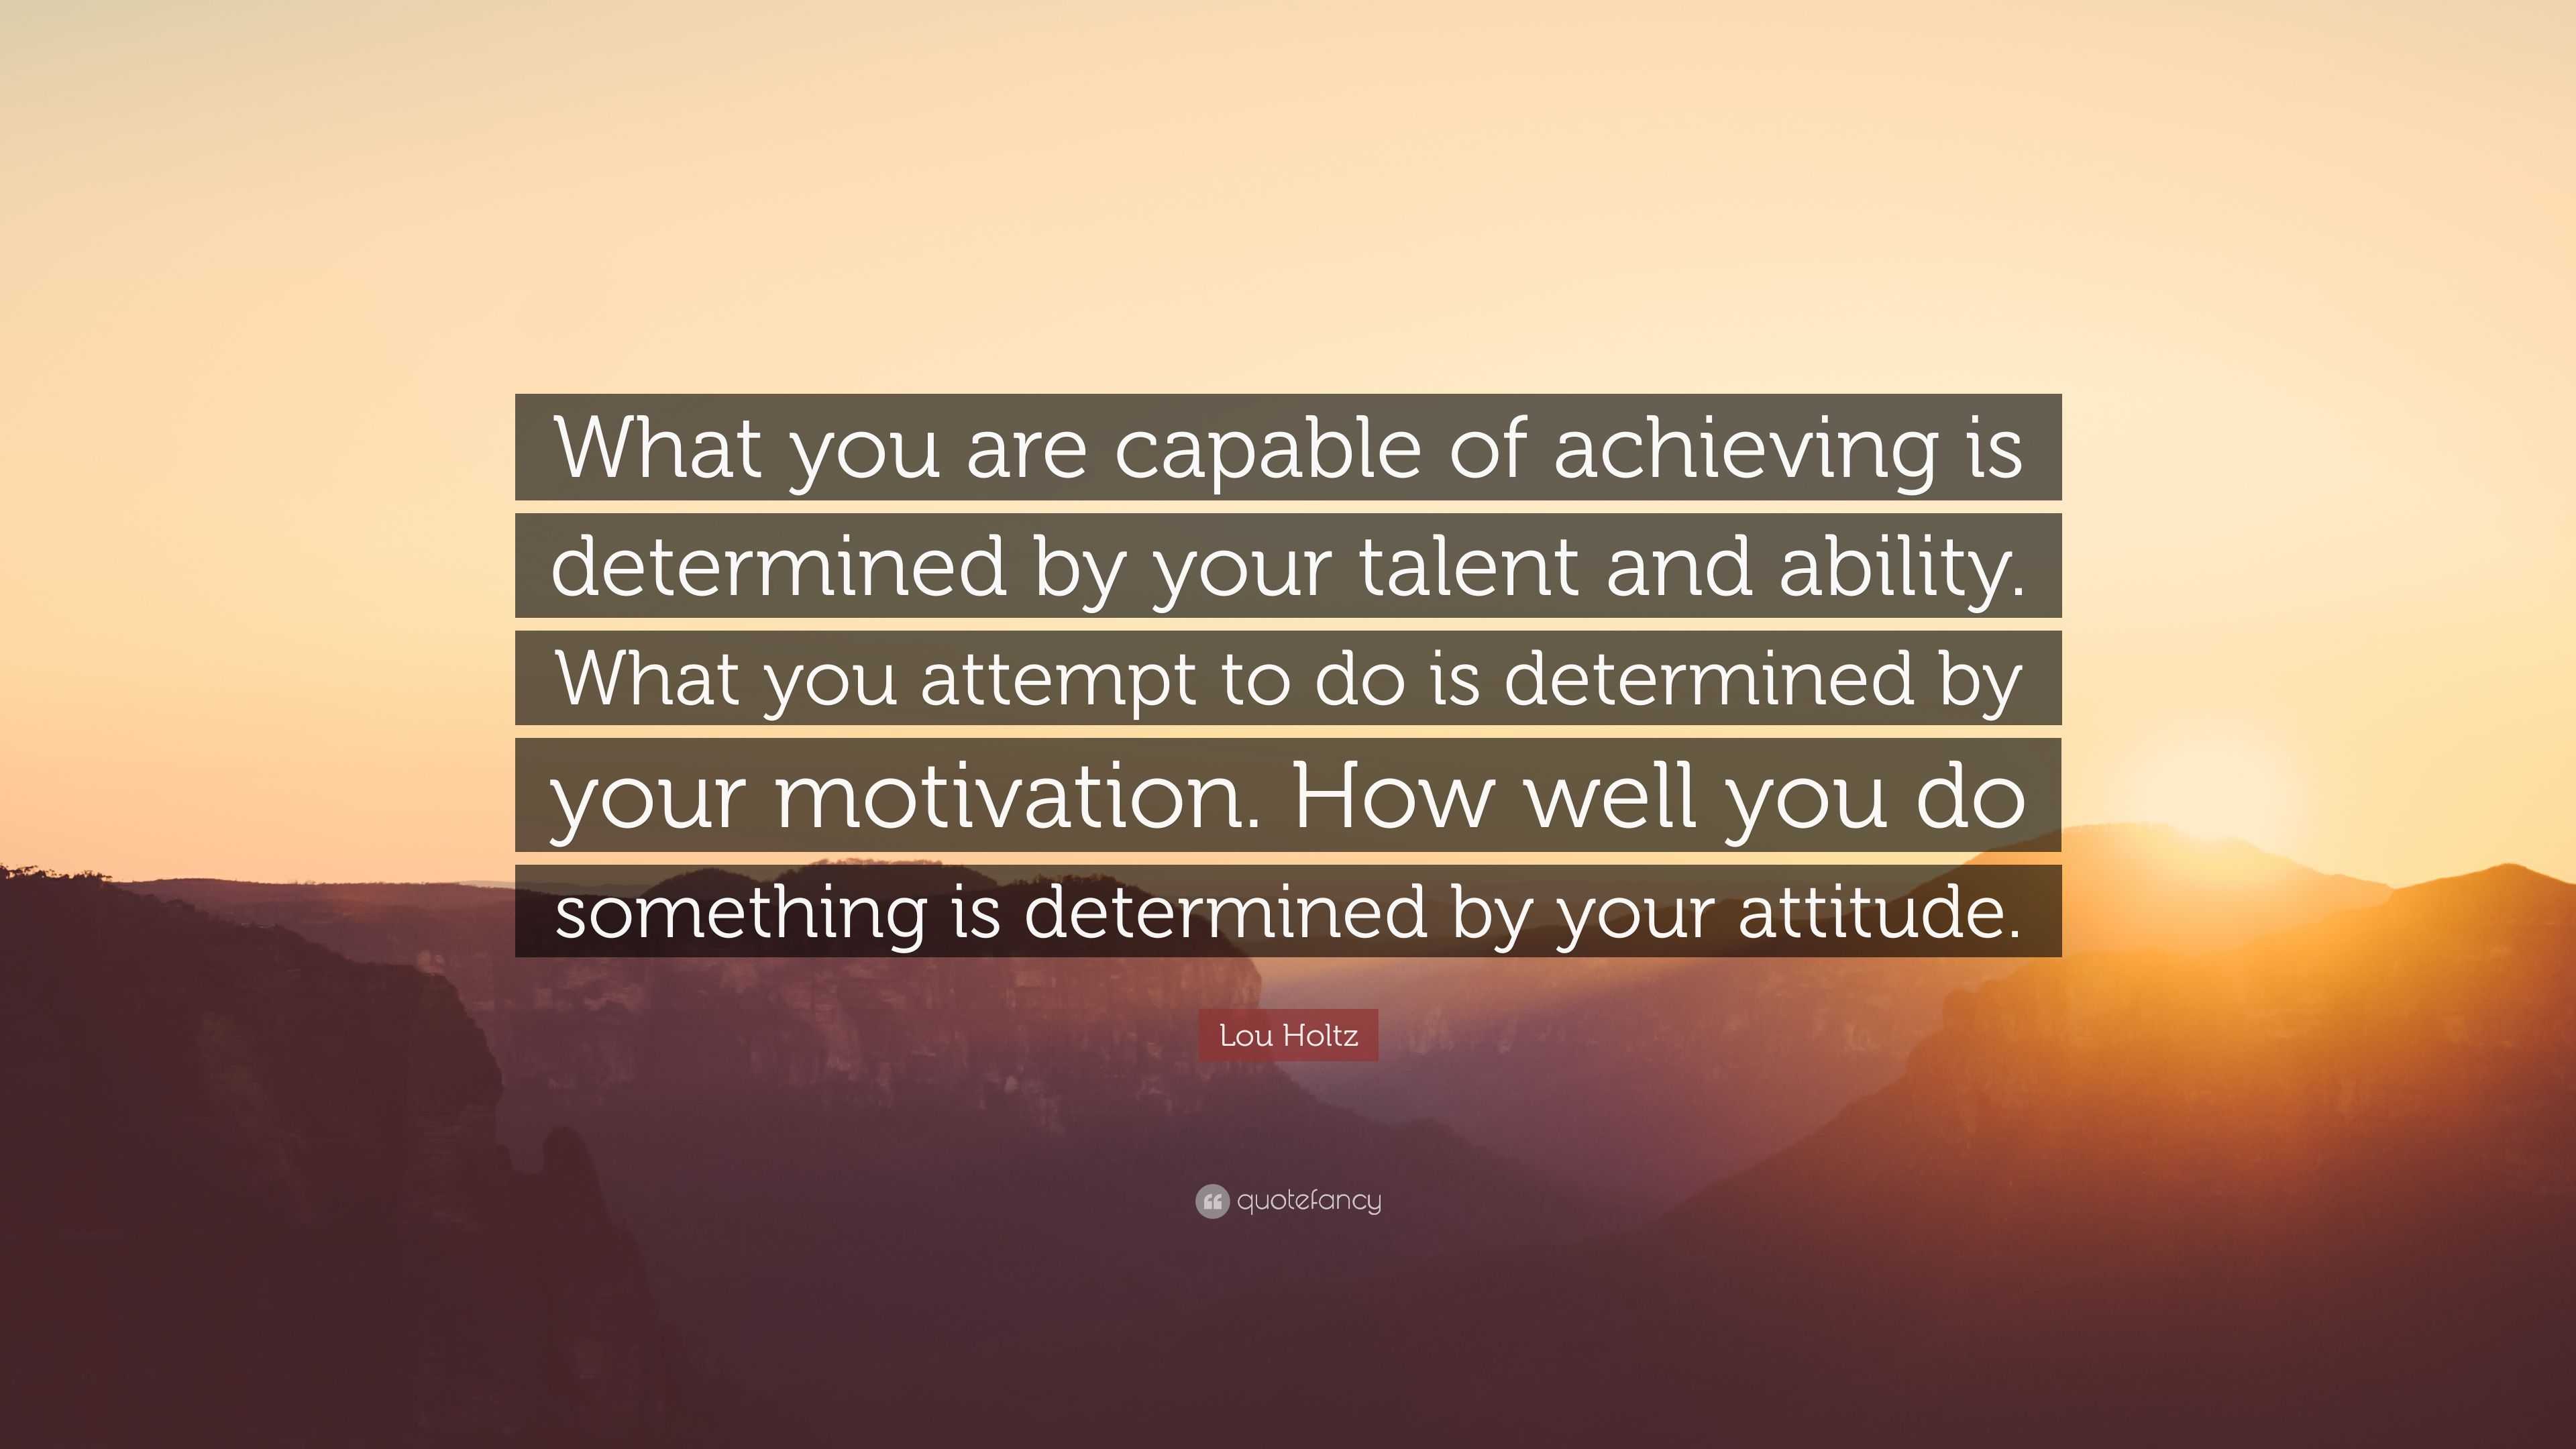 Lou Holtz Quote: “What you are capable of achieving is determined by